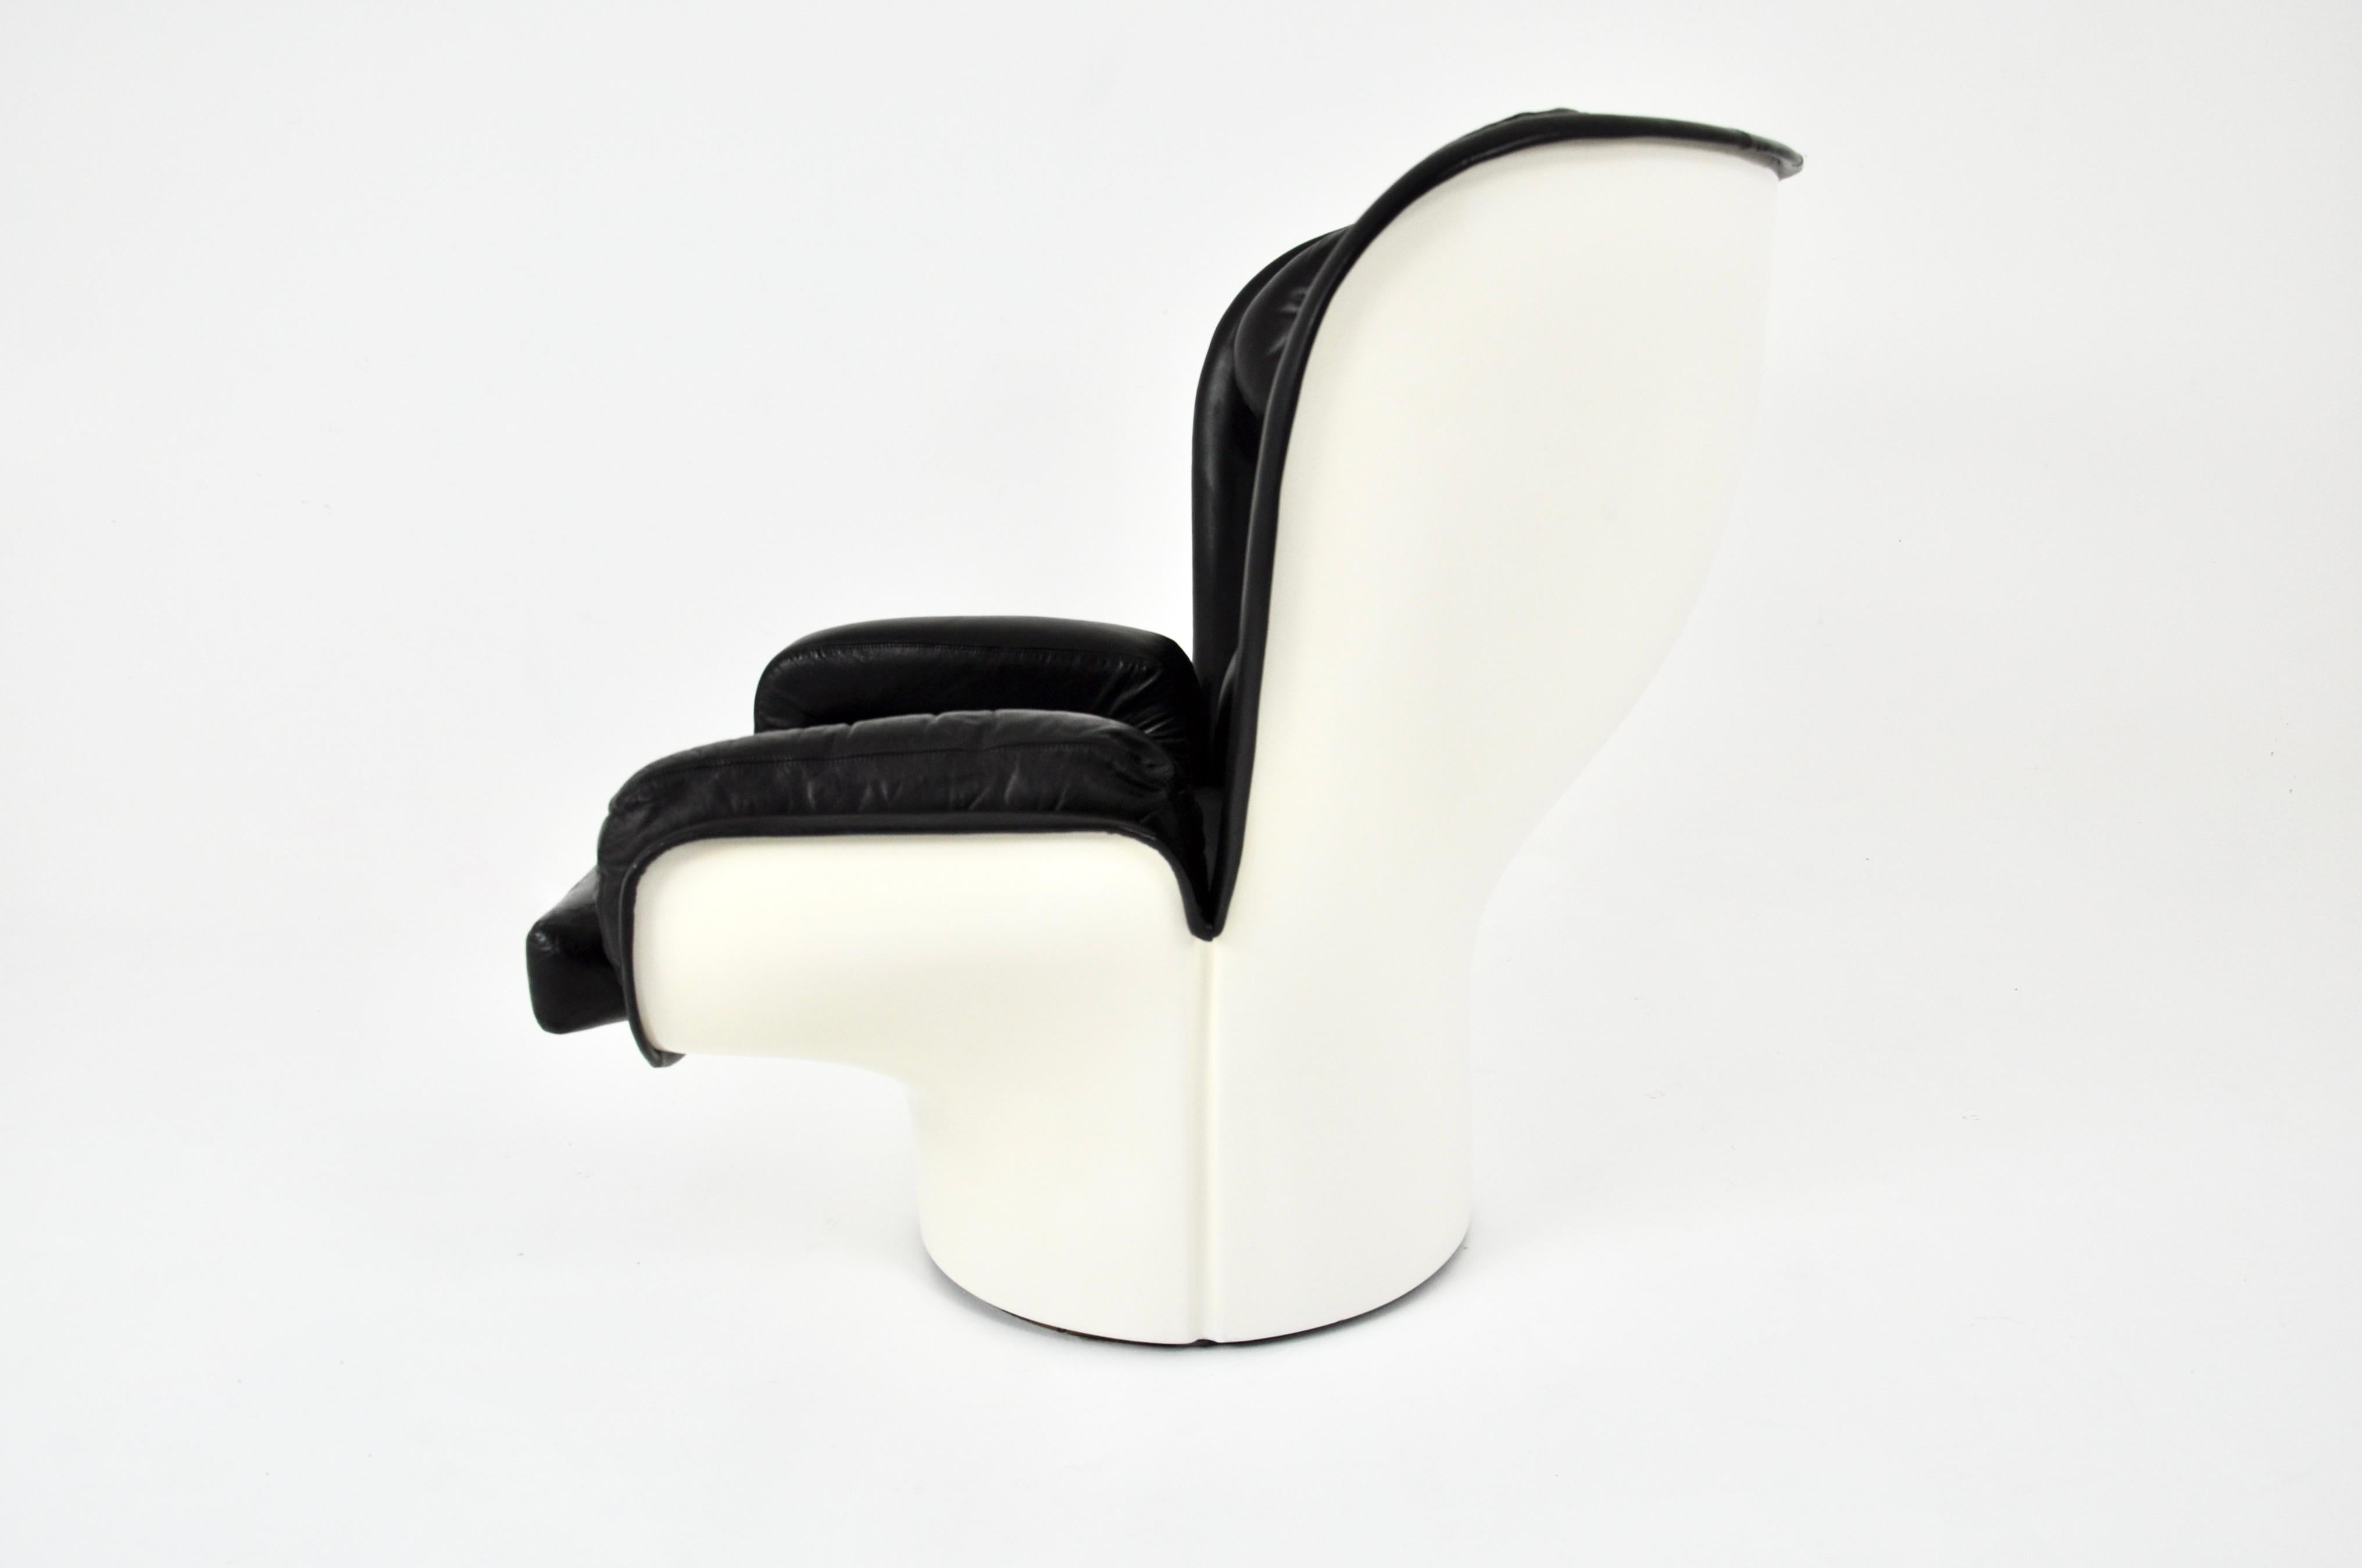 Metal Elda Lounge Chair by Joe Colombo for Comfort, Italy, 1960s For Sale